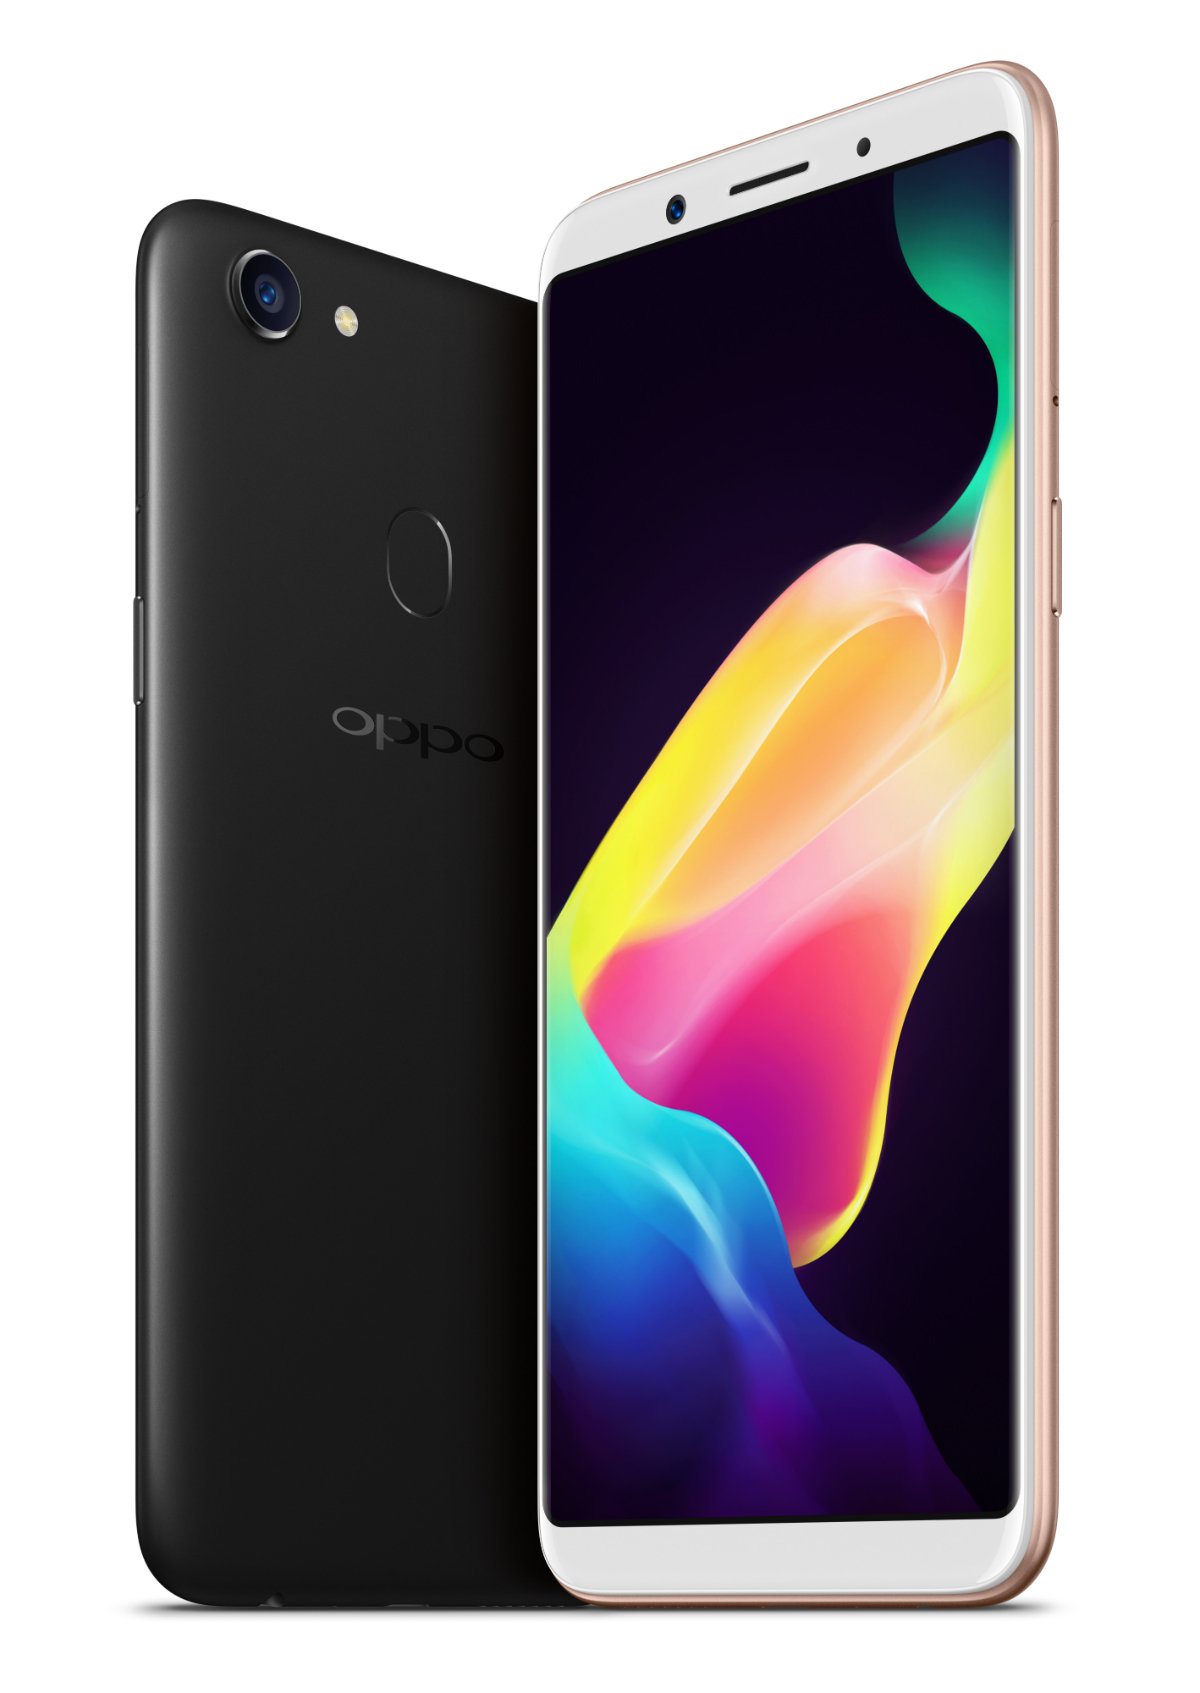 REVIEW: Oppo A73, The iPhone Clone Obsessed With Beautiful Selfies